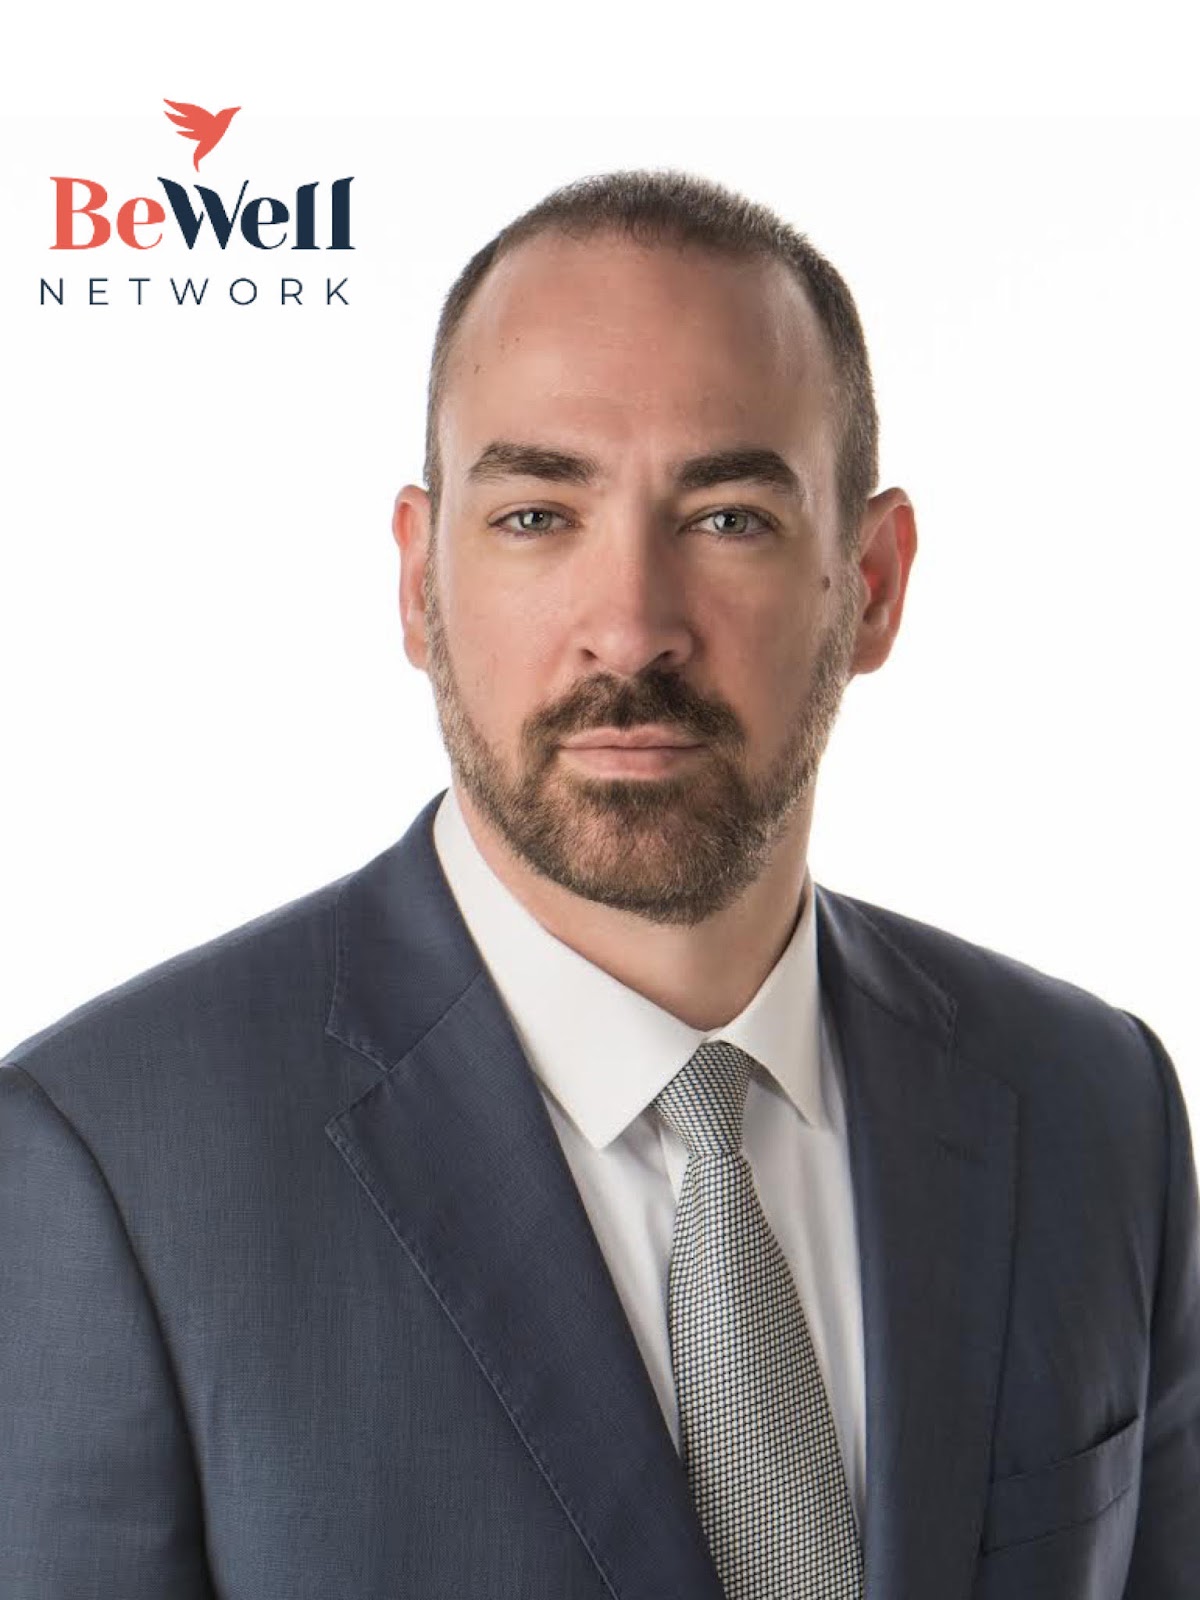 The BeWell Network, Wednesday, December 15, 2021, Press release picture